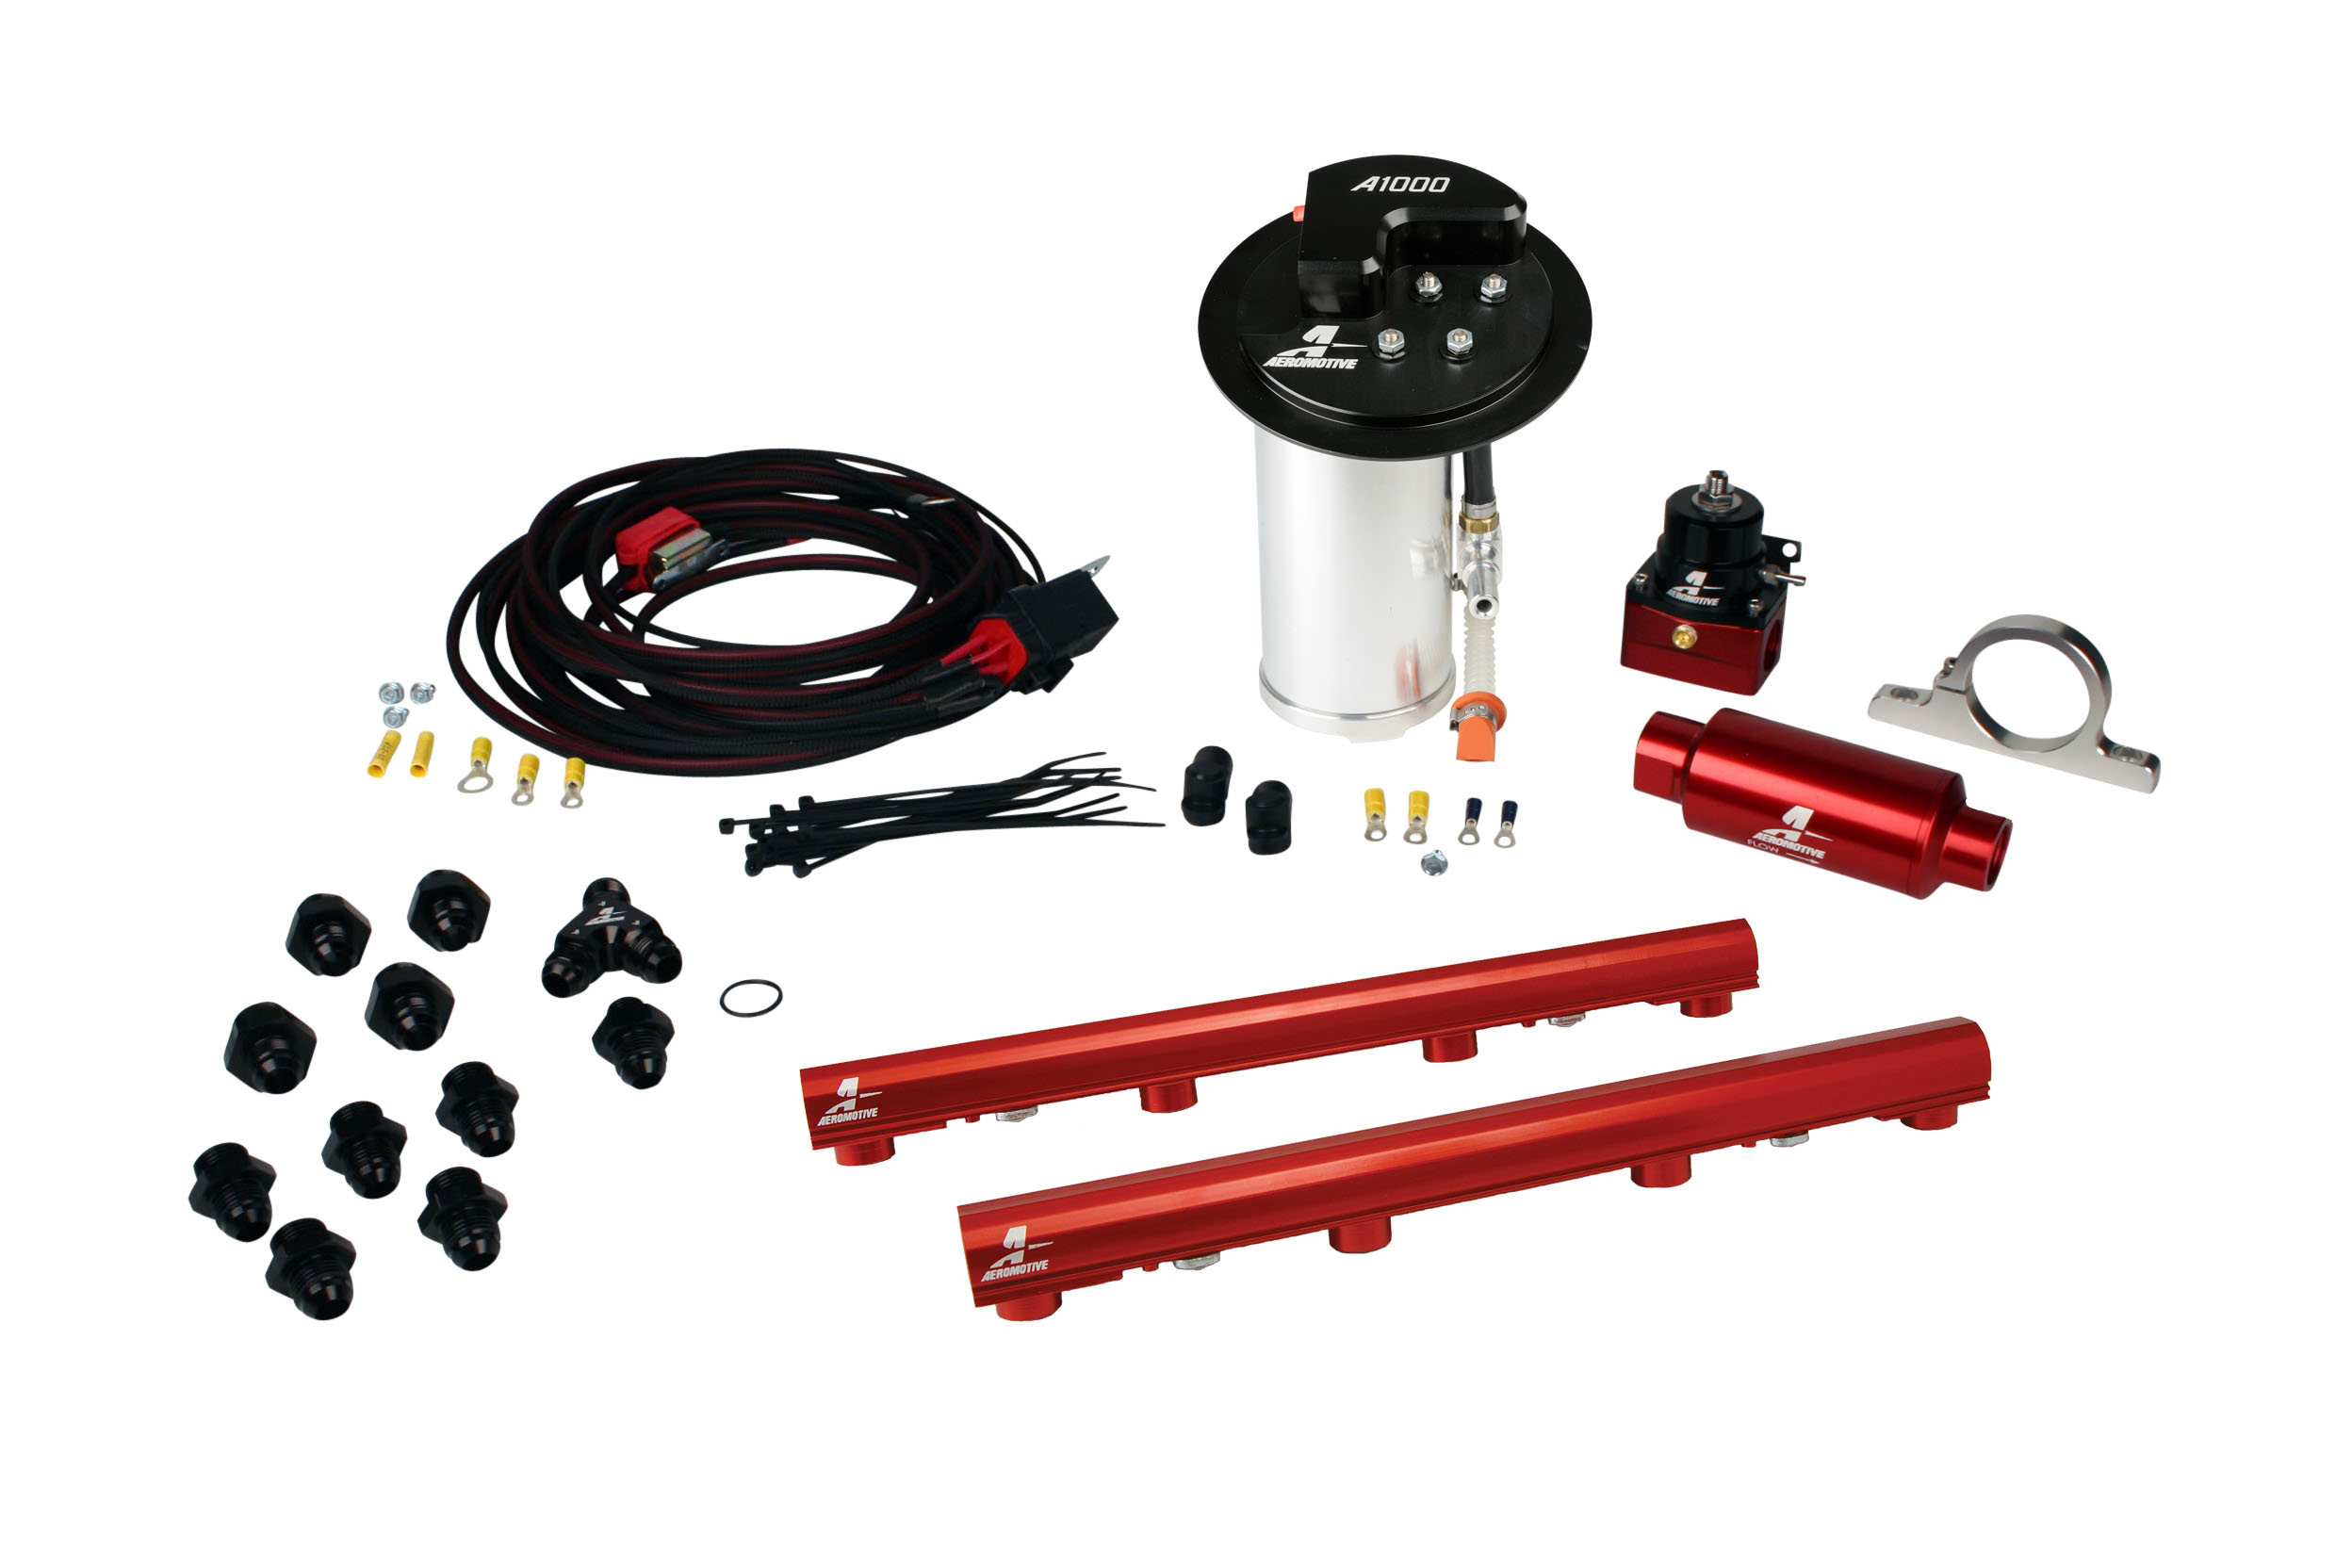 2010-2017 Ford Mustang GT Aeromotive Stealth A1000 Race Fuel System w/4.6L 3-Valve Fuel Rail